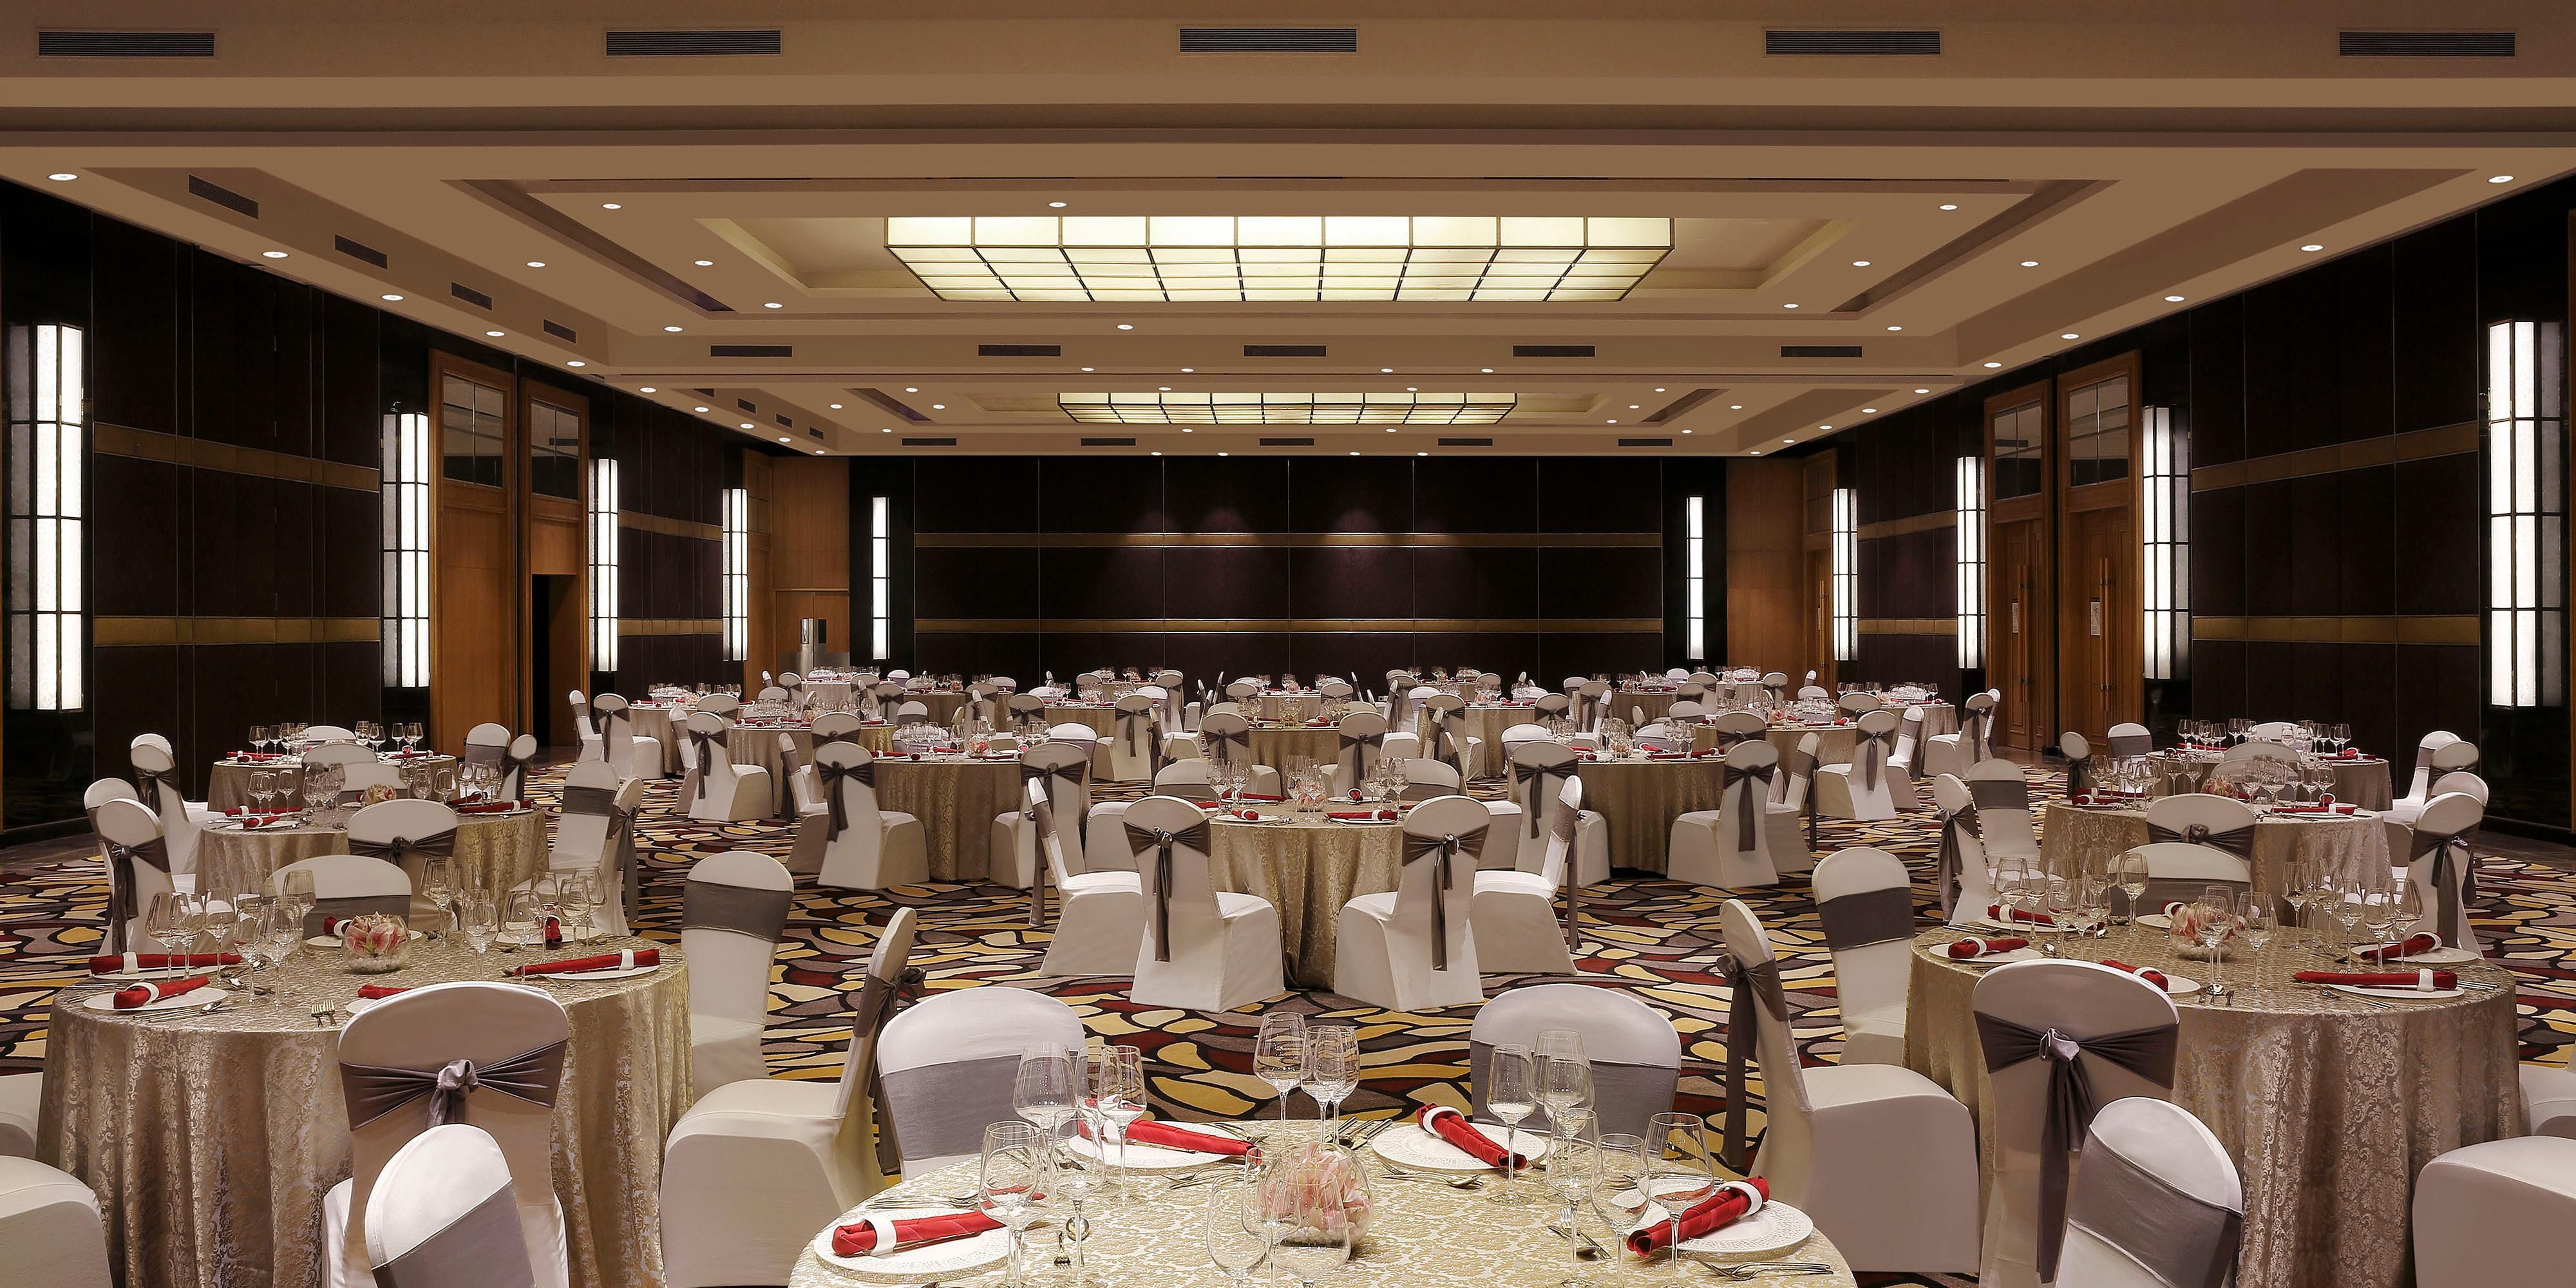 Encompassing a generous 51,000 square feet, the hotel offers an array of state-of-the-art indoor and outdoor venues. Immerse yourself in the elegance of our pillarless ballroom or bask in the vast expanse of our 31,000-square-foot open-air lawn. Your event's canvas is poised, ready to be transformed into a masterpiece.